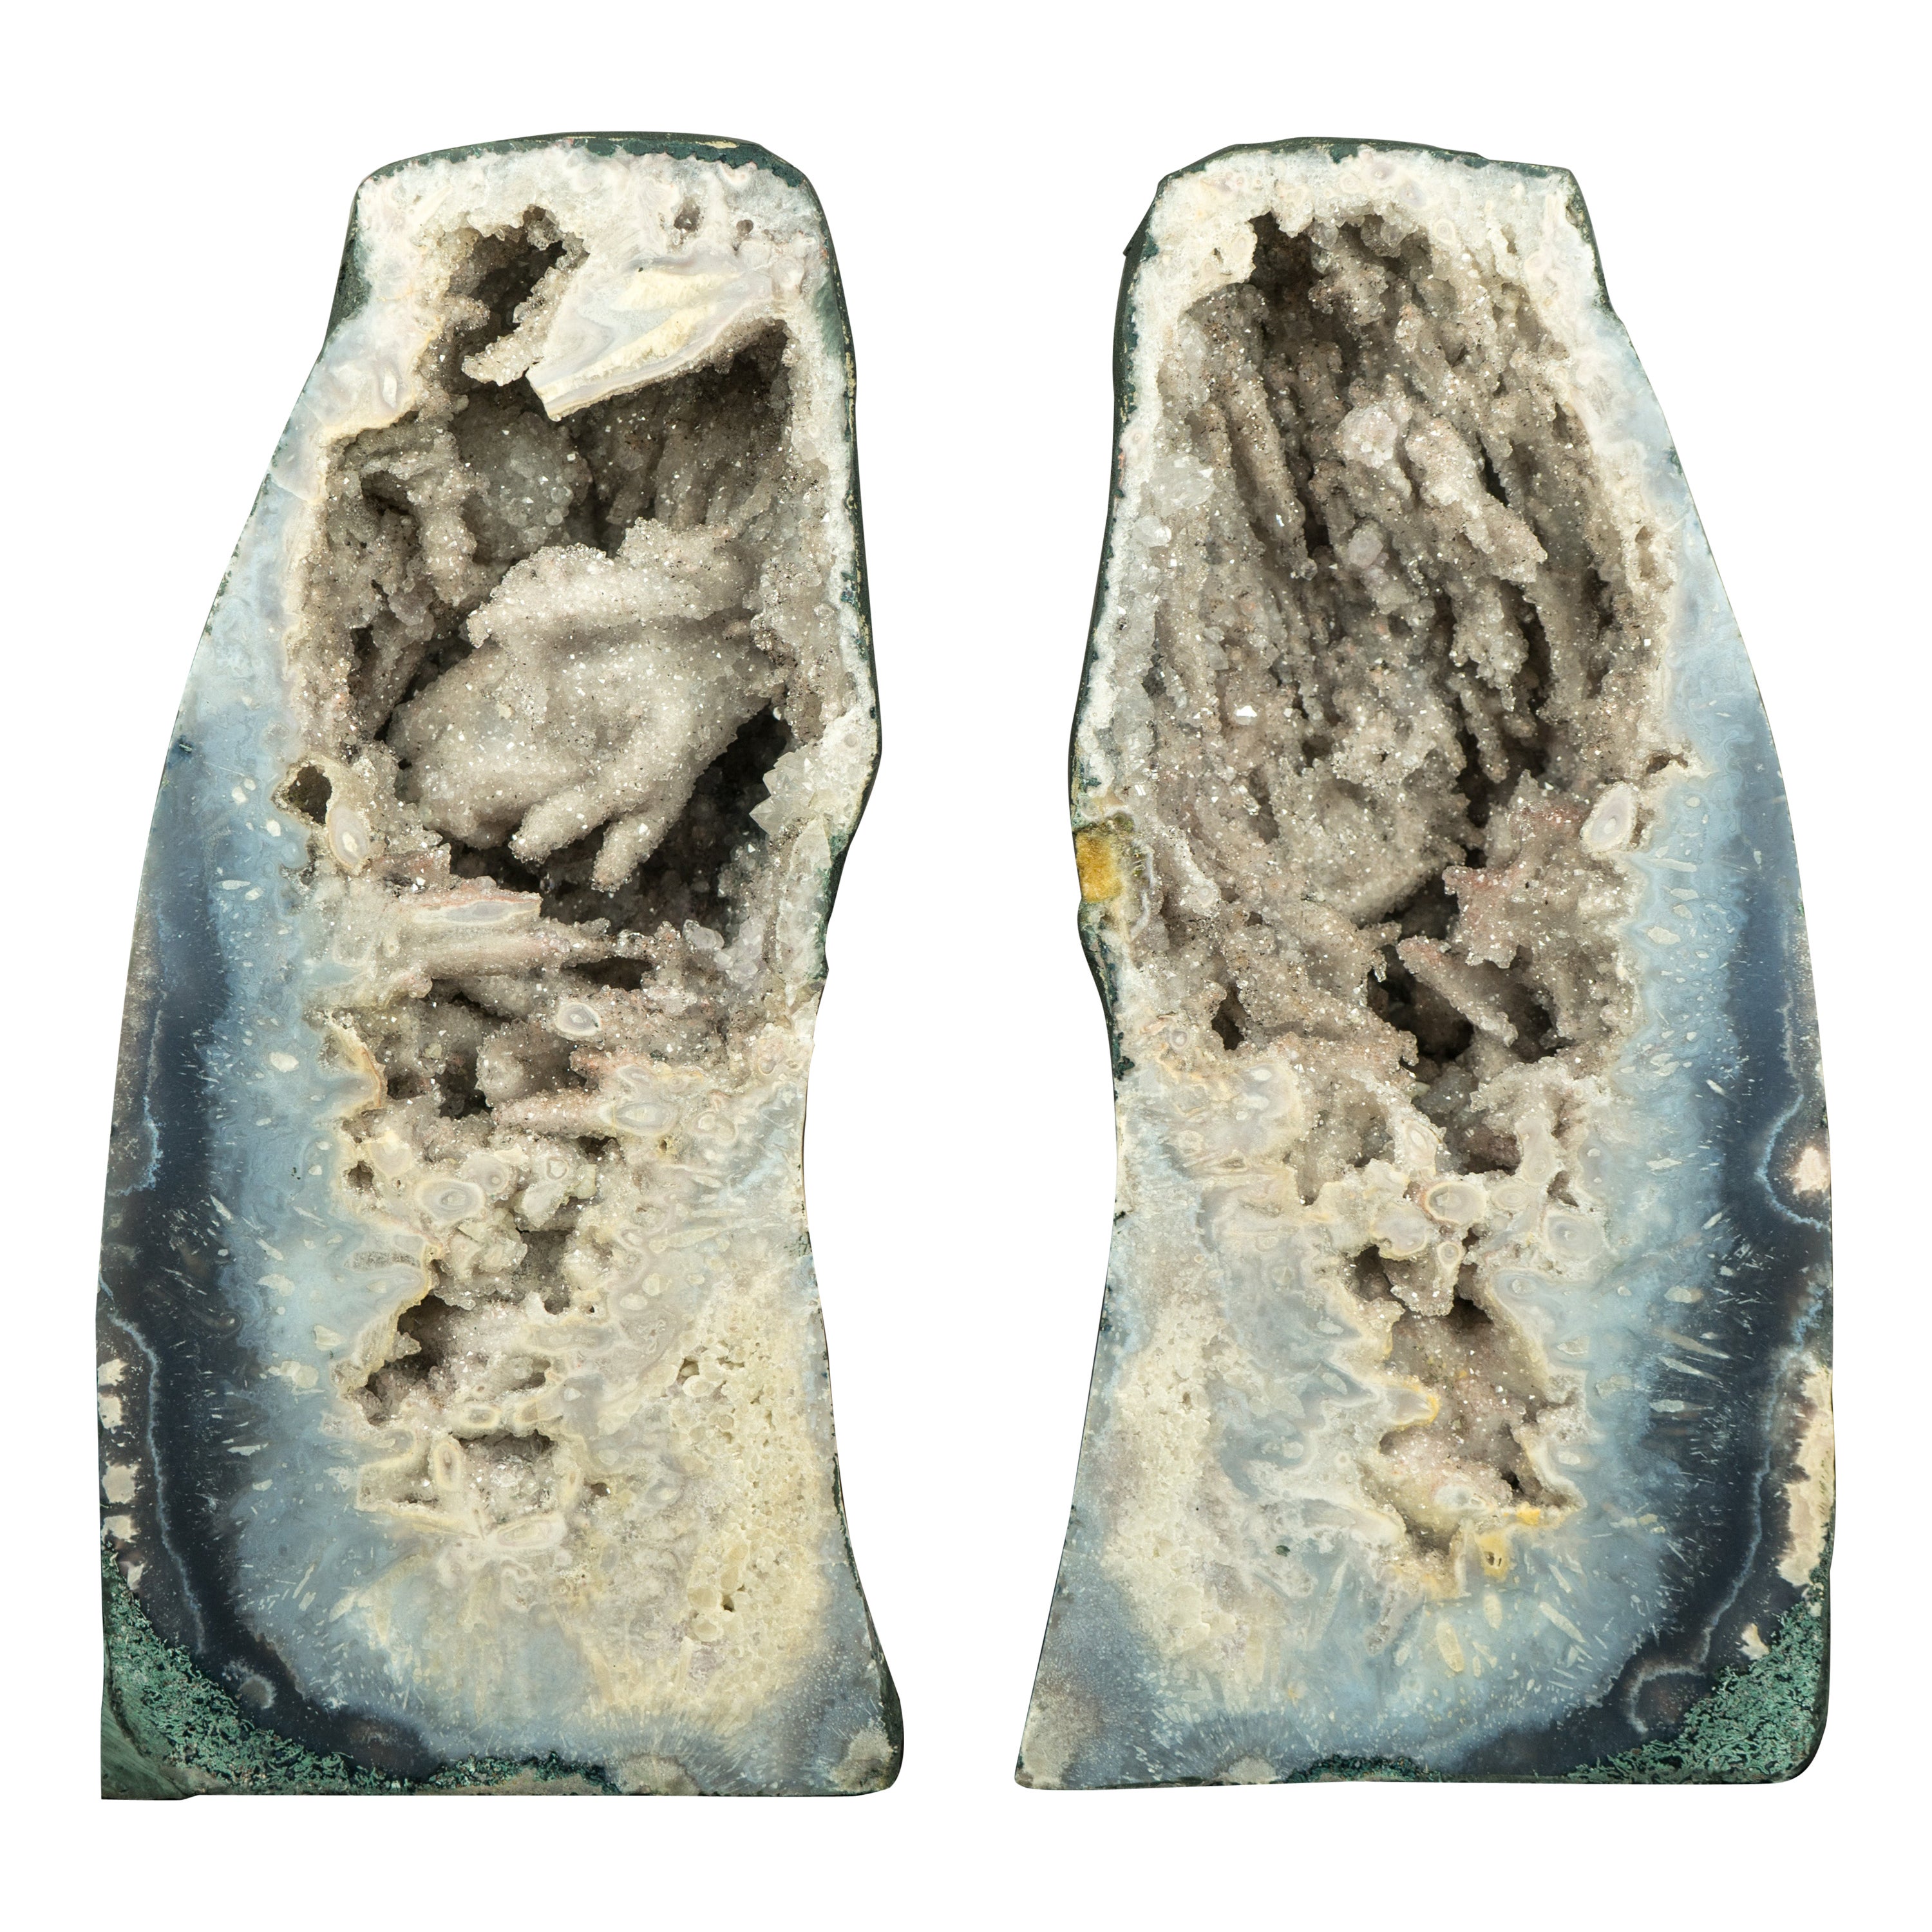 Pair of Landscaped Sea Blue Agate Geodes with Crystal Quartz ps. after Anhydrite For Sale